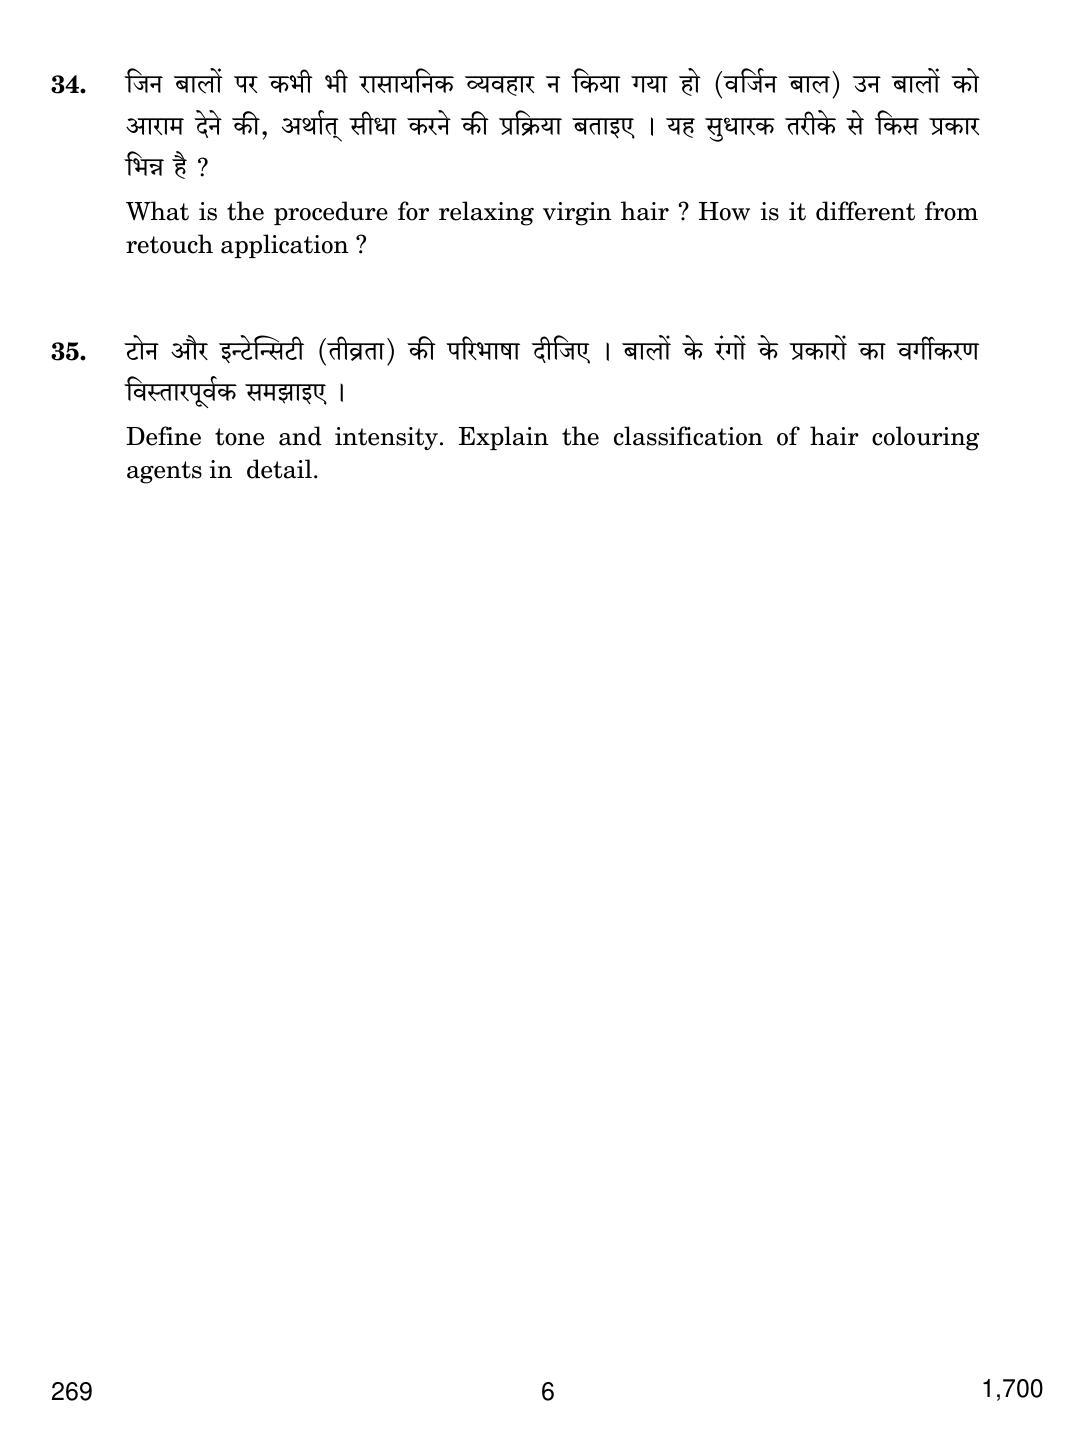 CBSE Class 12 269 BEAUTY AND HAIR 2018 Question Paper - Page 6